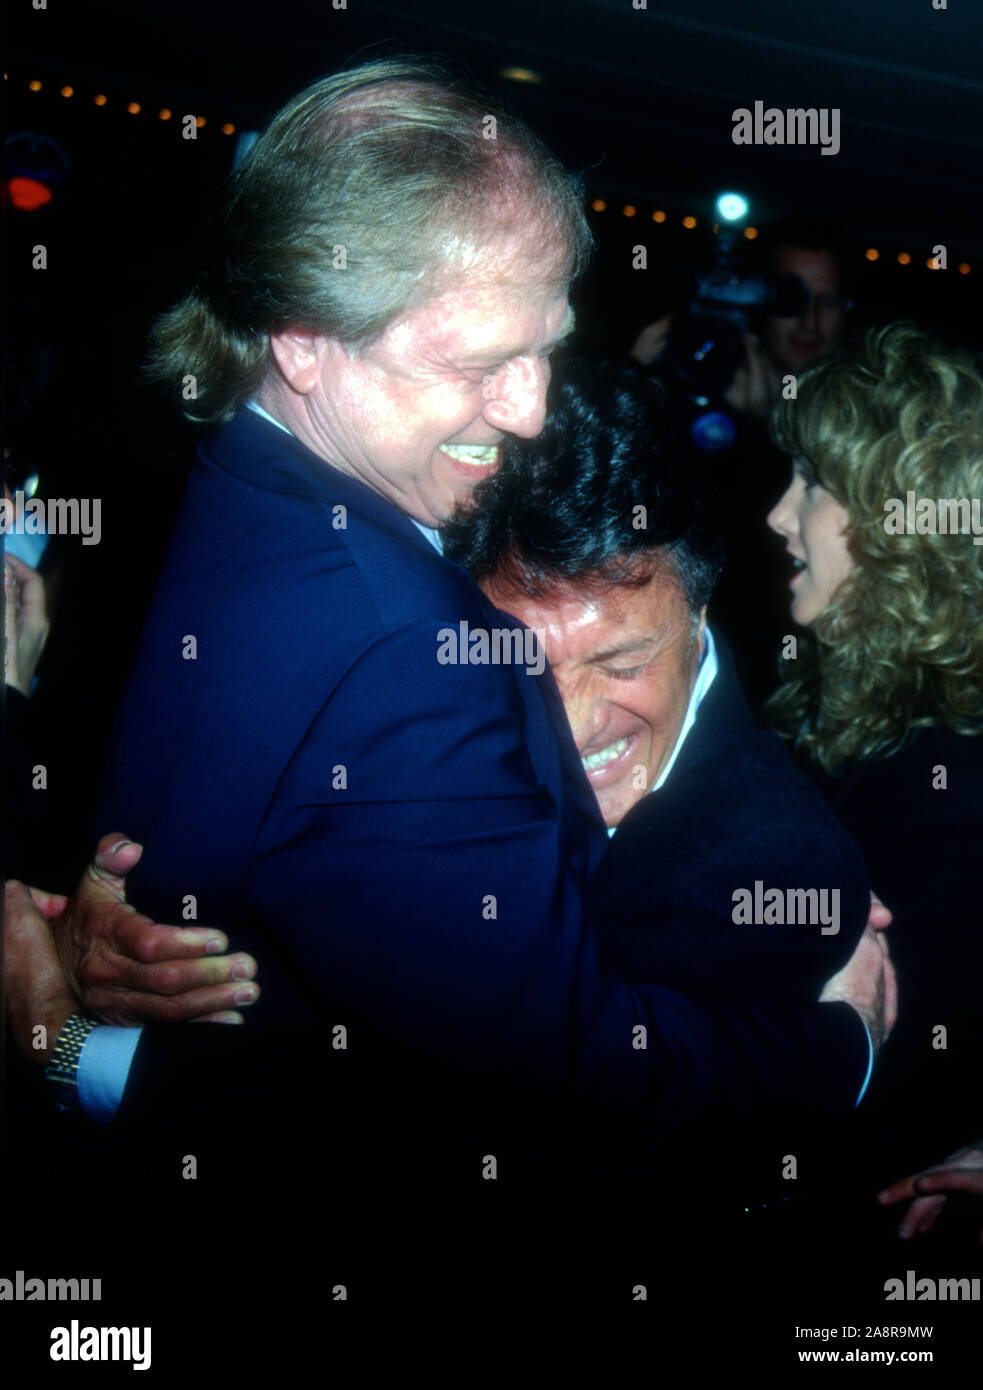 Westwood, California, USA 6th March 1995 Director Wolfgang Petersen and actor Dustin Hoffman attend Warner Bros. Pictures 'Outbreak' Premiere on March 6, 1995 at Mann Bruin Theatre in Westwood, California, USA. Photo by Barry King/Alamy Stock Photo Stock Photo